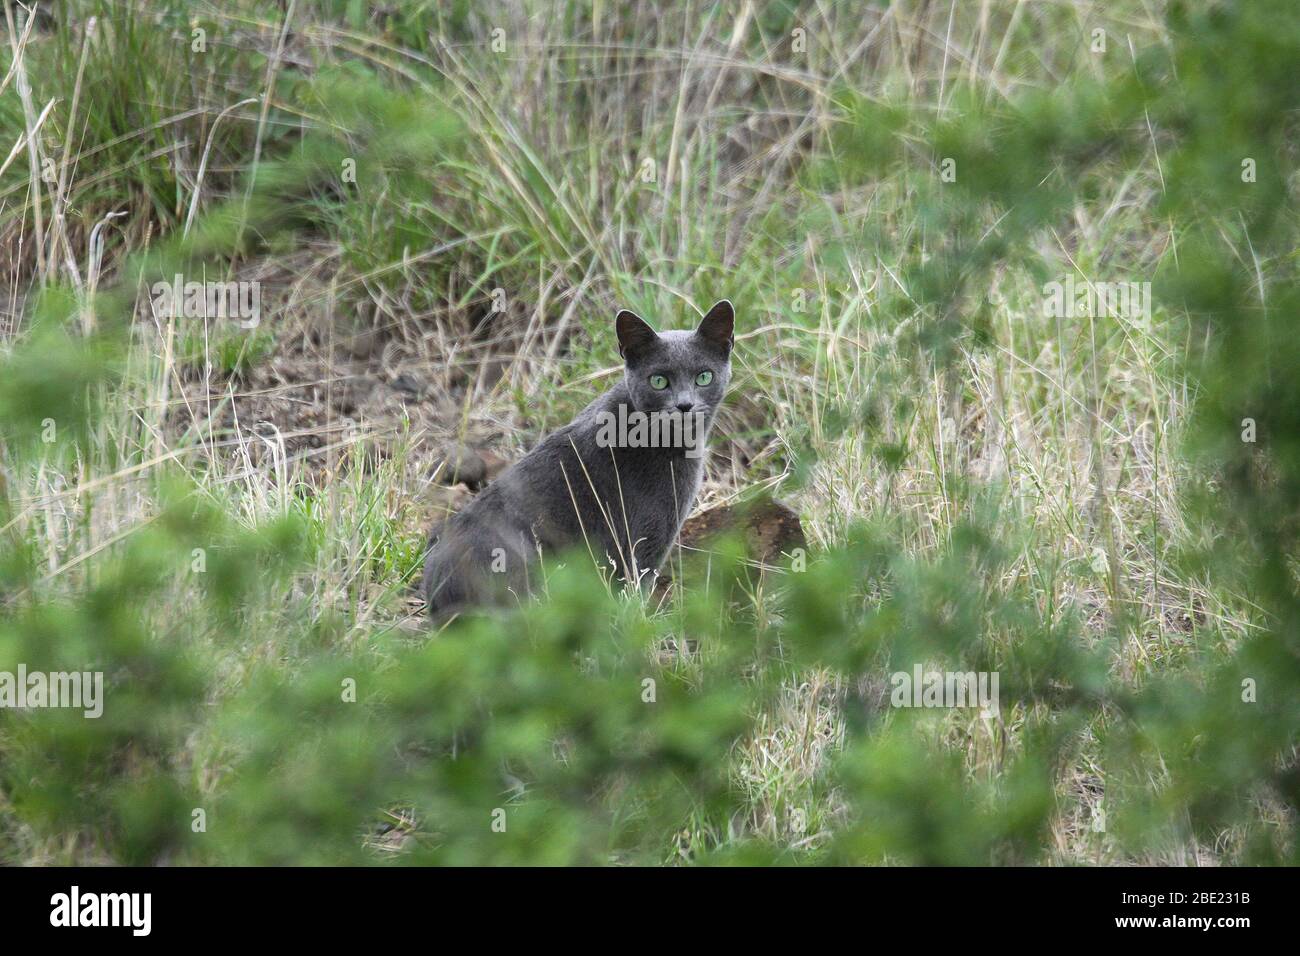 African wild cat (Felis silvestris libyca or Felis lybica) In the grass. This small, slender cat generally inhabits forested areas but can be found in Stock Photo